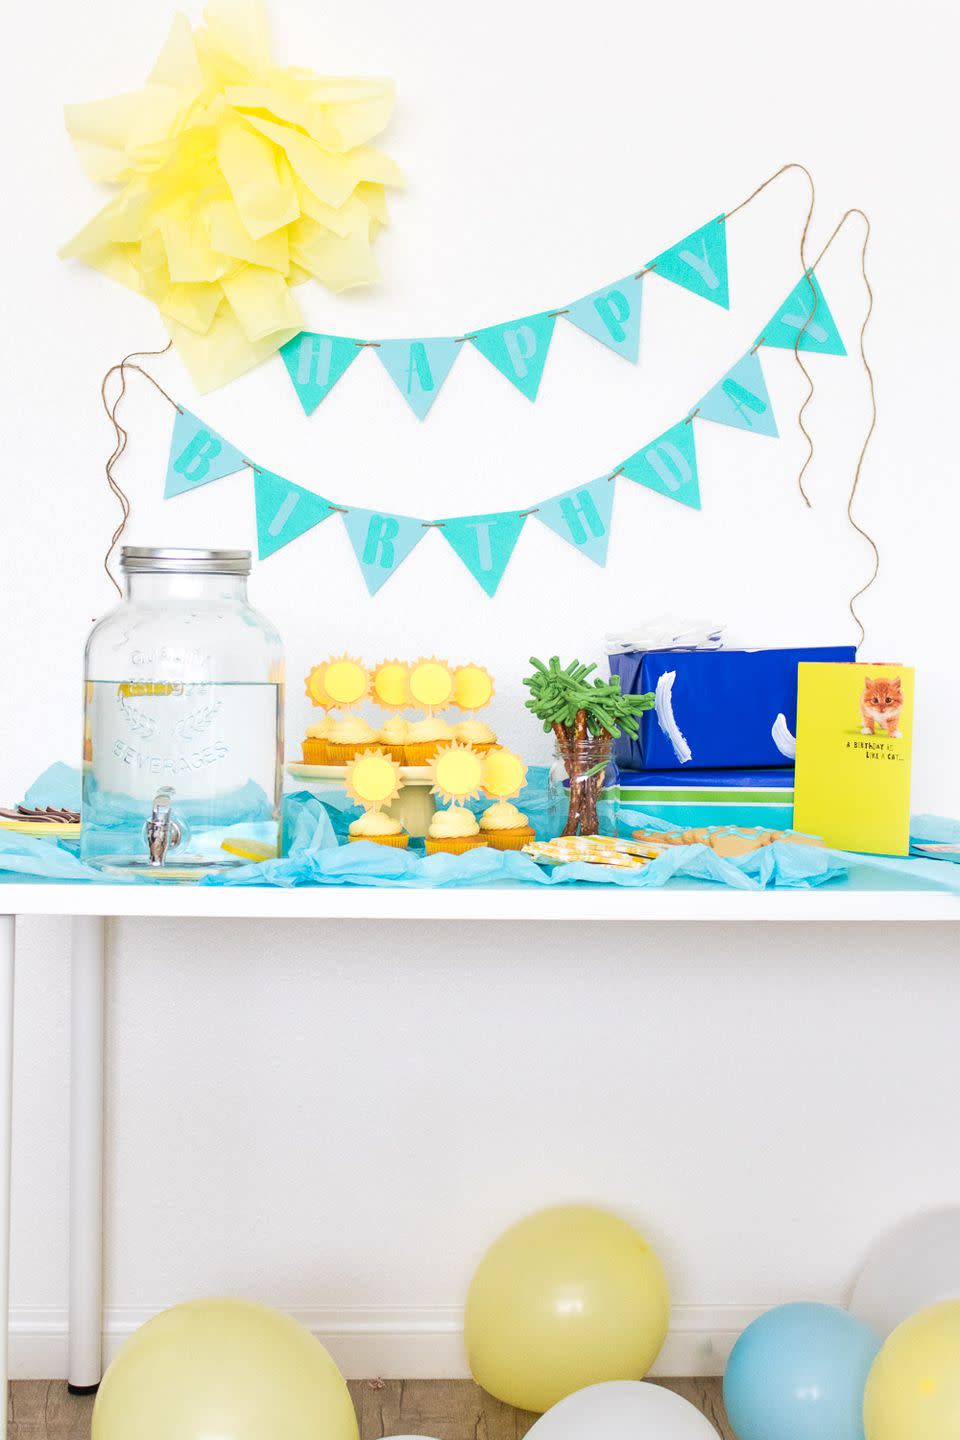 <p>Even if it’s not summer, a summer-themed soirée is still an amazing choice. Suns and sky-blue everything make cheerful visuals for birthdays or going-away parties. </p><p><strong>See more at <a href="https://www.clubcrafted.com/celebrating-summer-dessert-table/" rel="nofollow noopener" target="_blank" data-ylk="slk:Club Crafted" class="link ">Club Crafted</a>.</strong></p><p><strong><strong><a class="link " href="https://go.redirectingat.com?id=74968X1596630&url=https%3A%2F%2Fwww.walmart.com%2Fsearch%3Fq%3Dyellow%2Btable%2Bcloths&sref=https%3A%2F%2Fwww.thepioneerwoman.com%2Fhome-lifestyle%2Fentertaining%2Fg41021040%2Fbest-party-themes%2F" rel="nofollow noopener" target="_blank" data-ylk="slk:SHOP YELLOW TABLE CLOTHS">SHOP YELLOW TABLE CLOTHS</a></strong><br></strong></p>